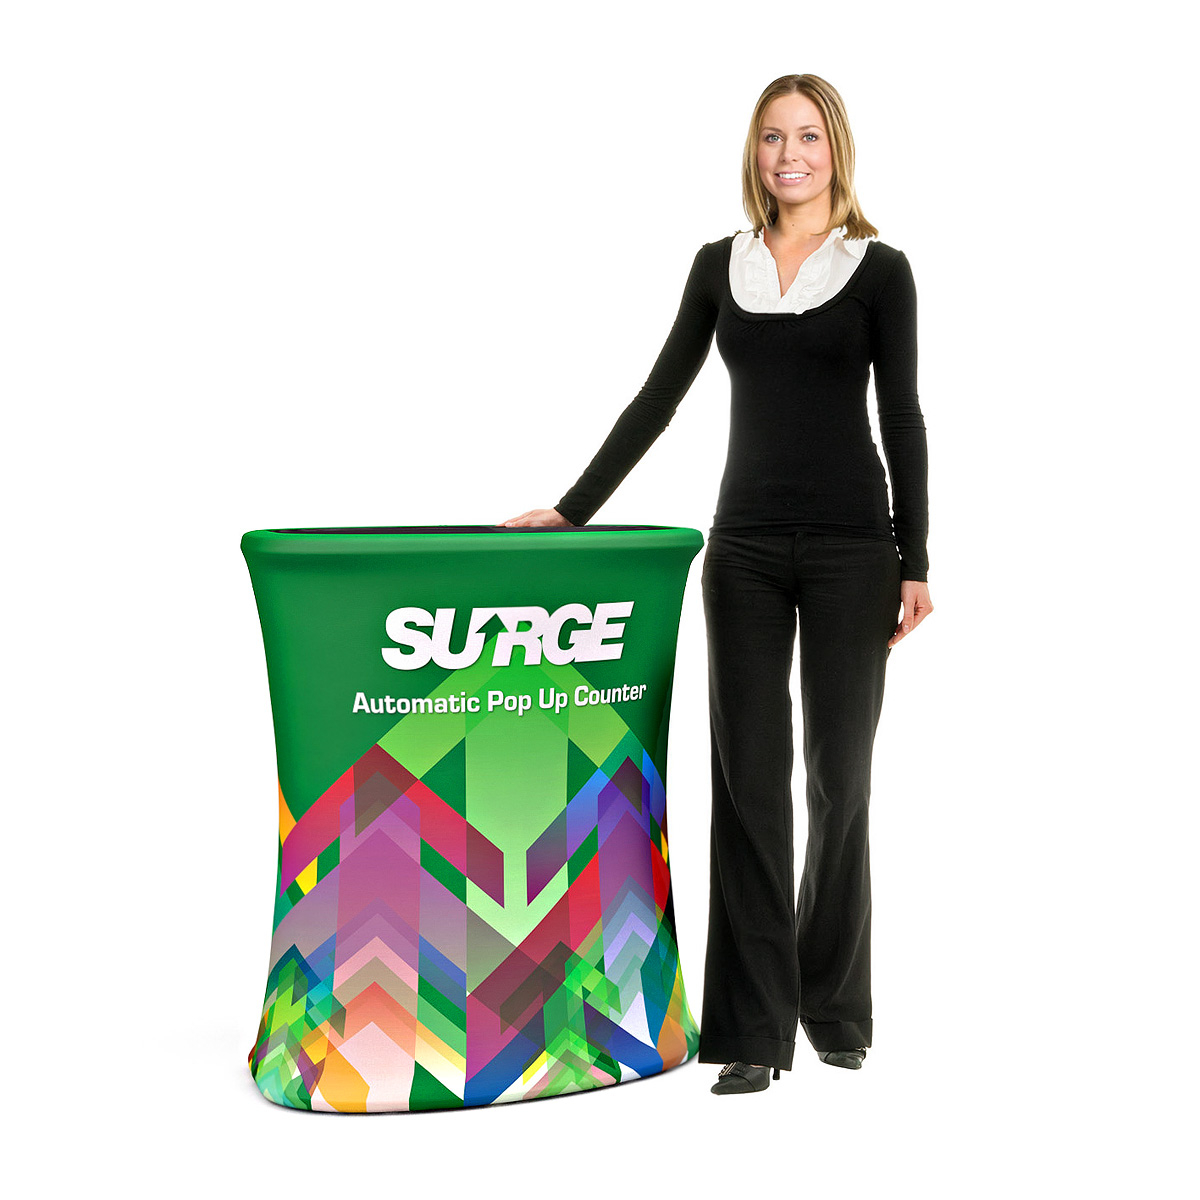 SURGE Automatic Pop Up Counter